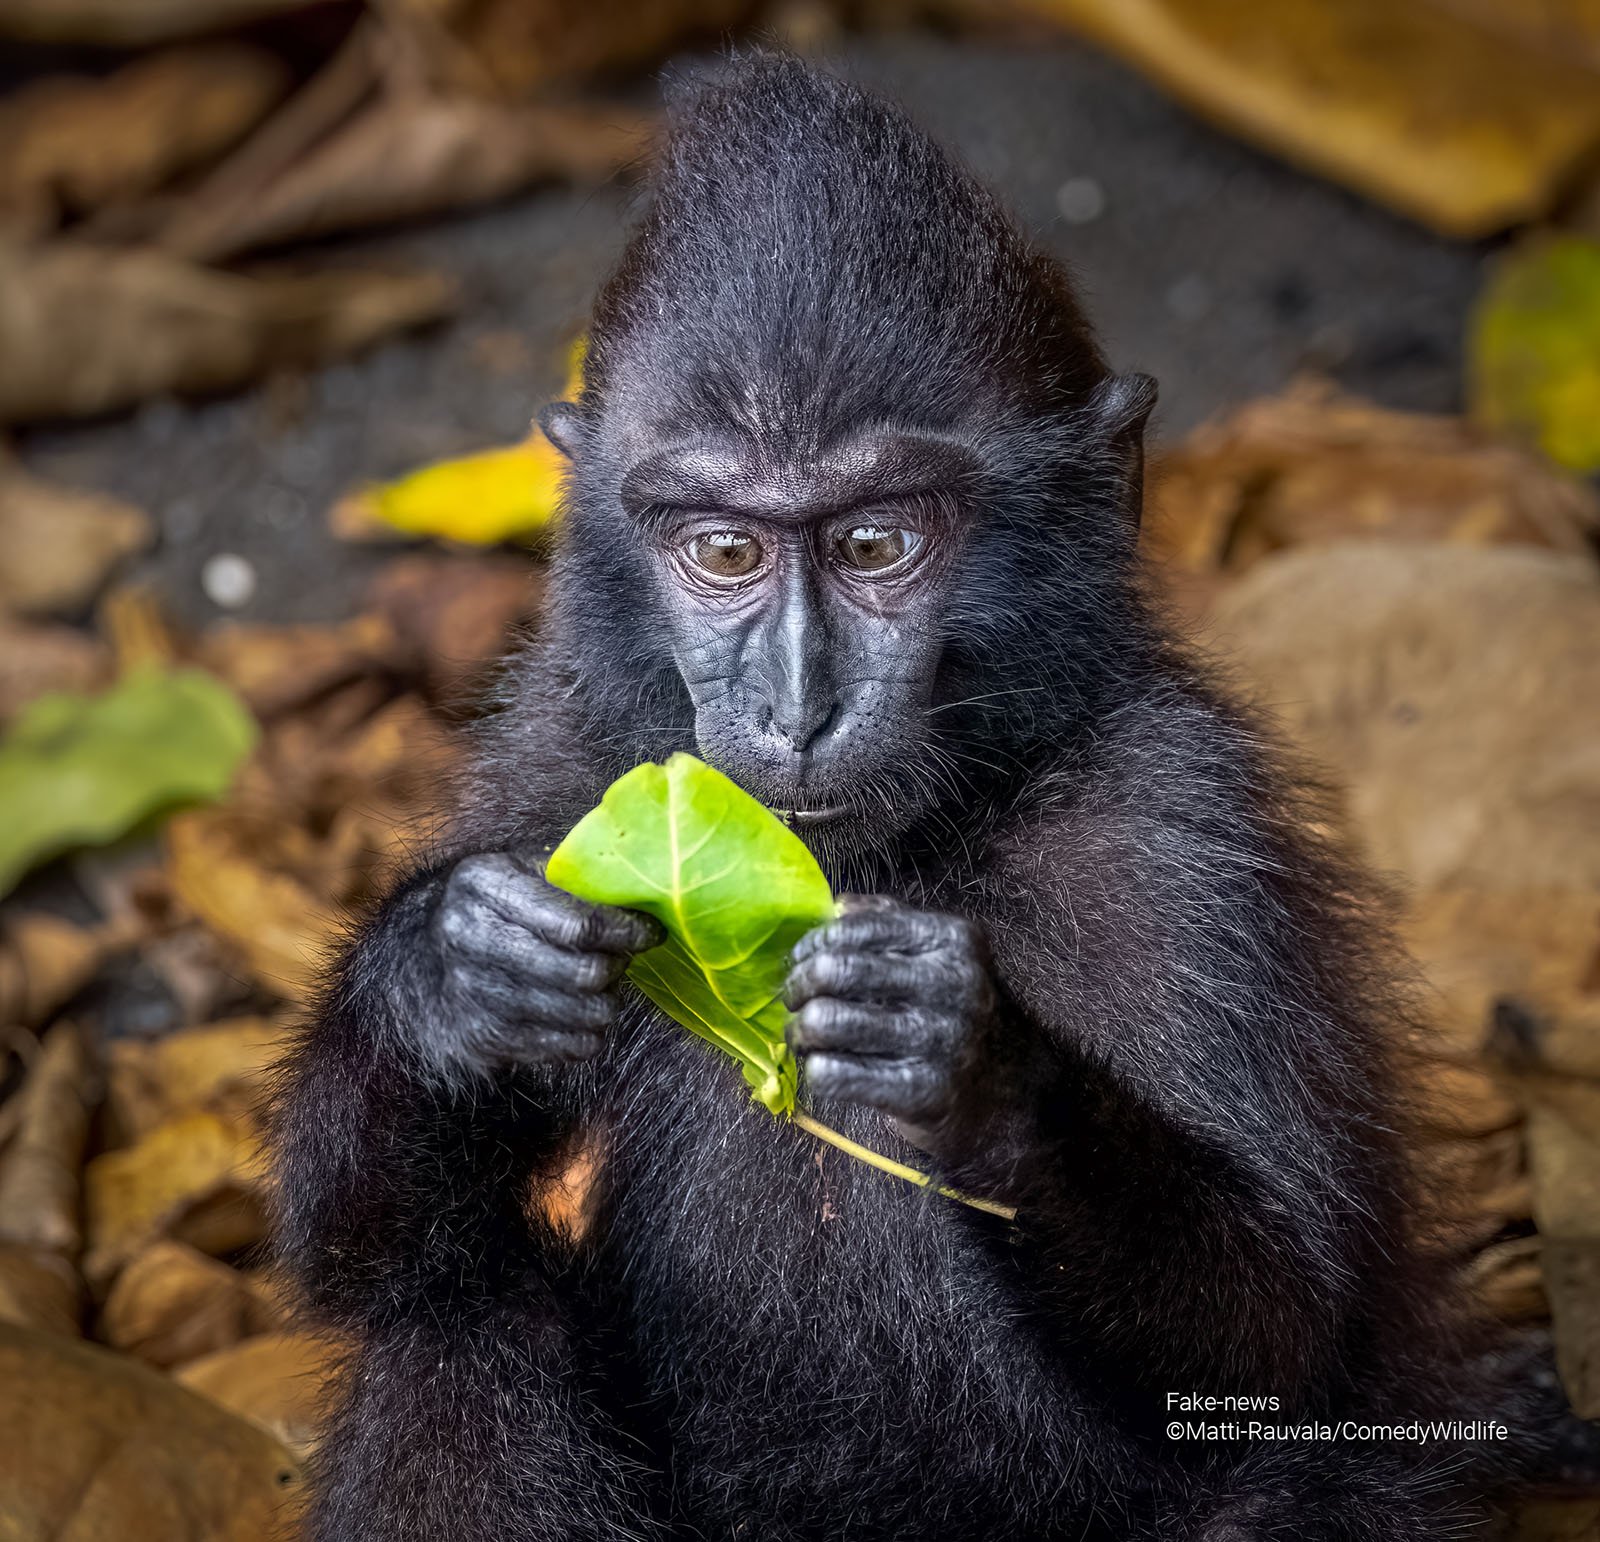 A Sulawesi macaque looks at a leaf with a surprised expression.